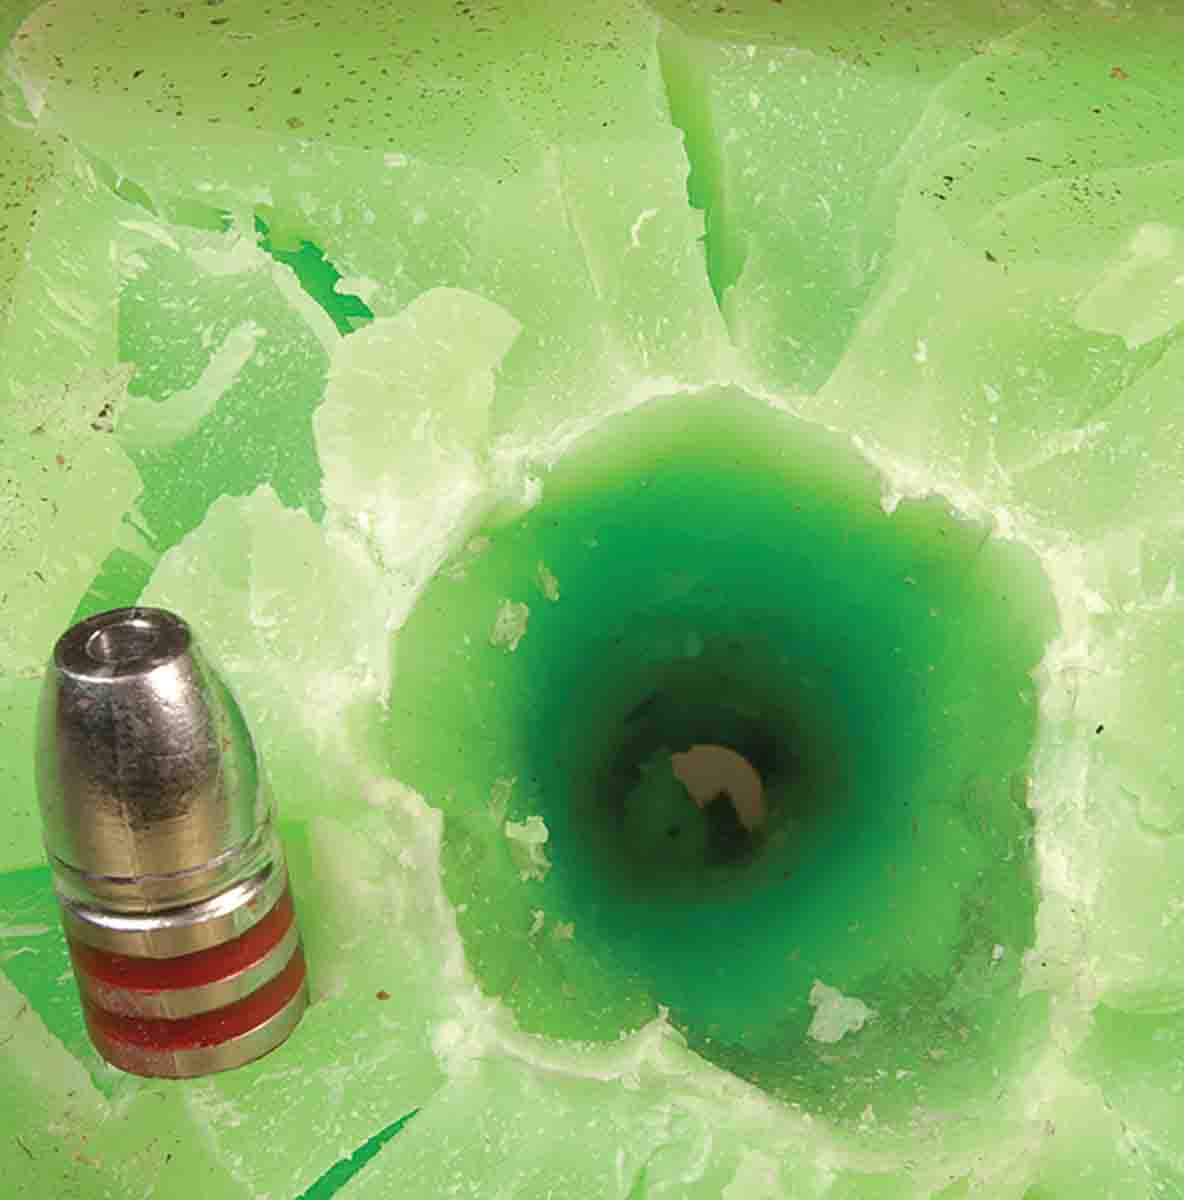 The hollowpoint Gould’s bullet tore a wide hole in ballistic wax. Penetration was about 7 inches. The bullet penetrated to about twice that depth in two whitetail deer.